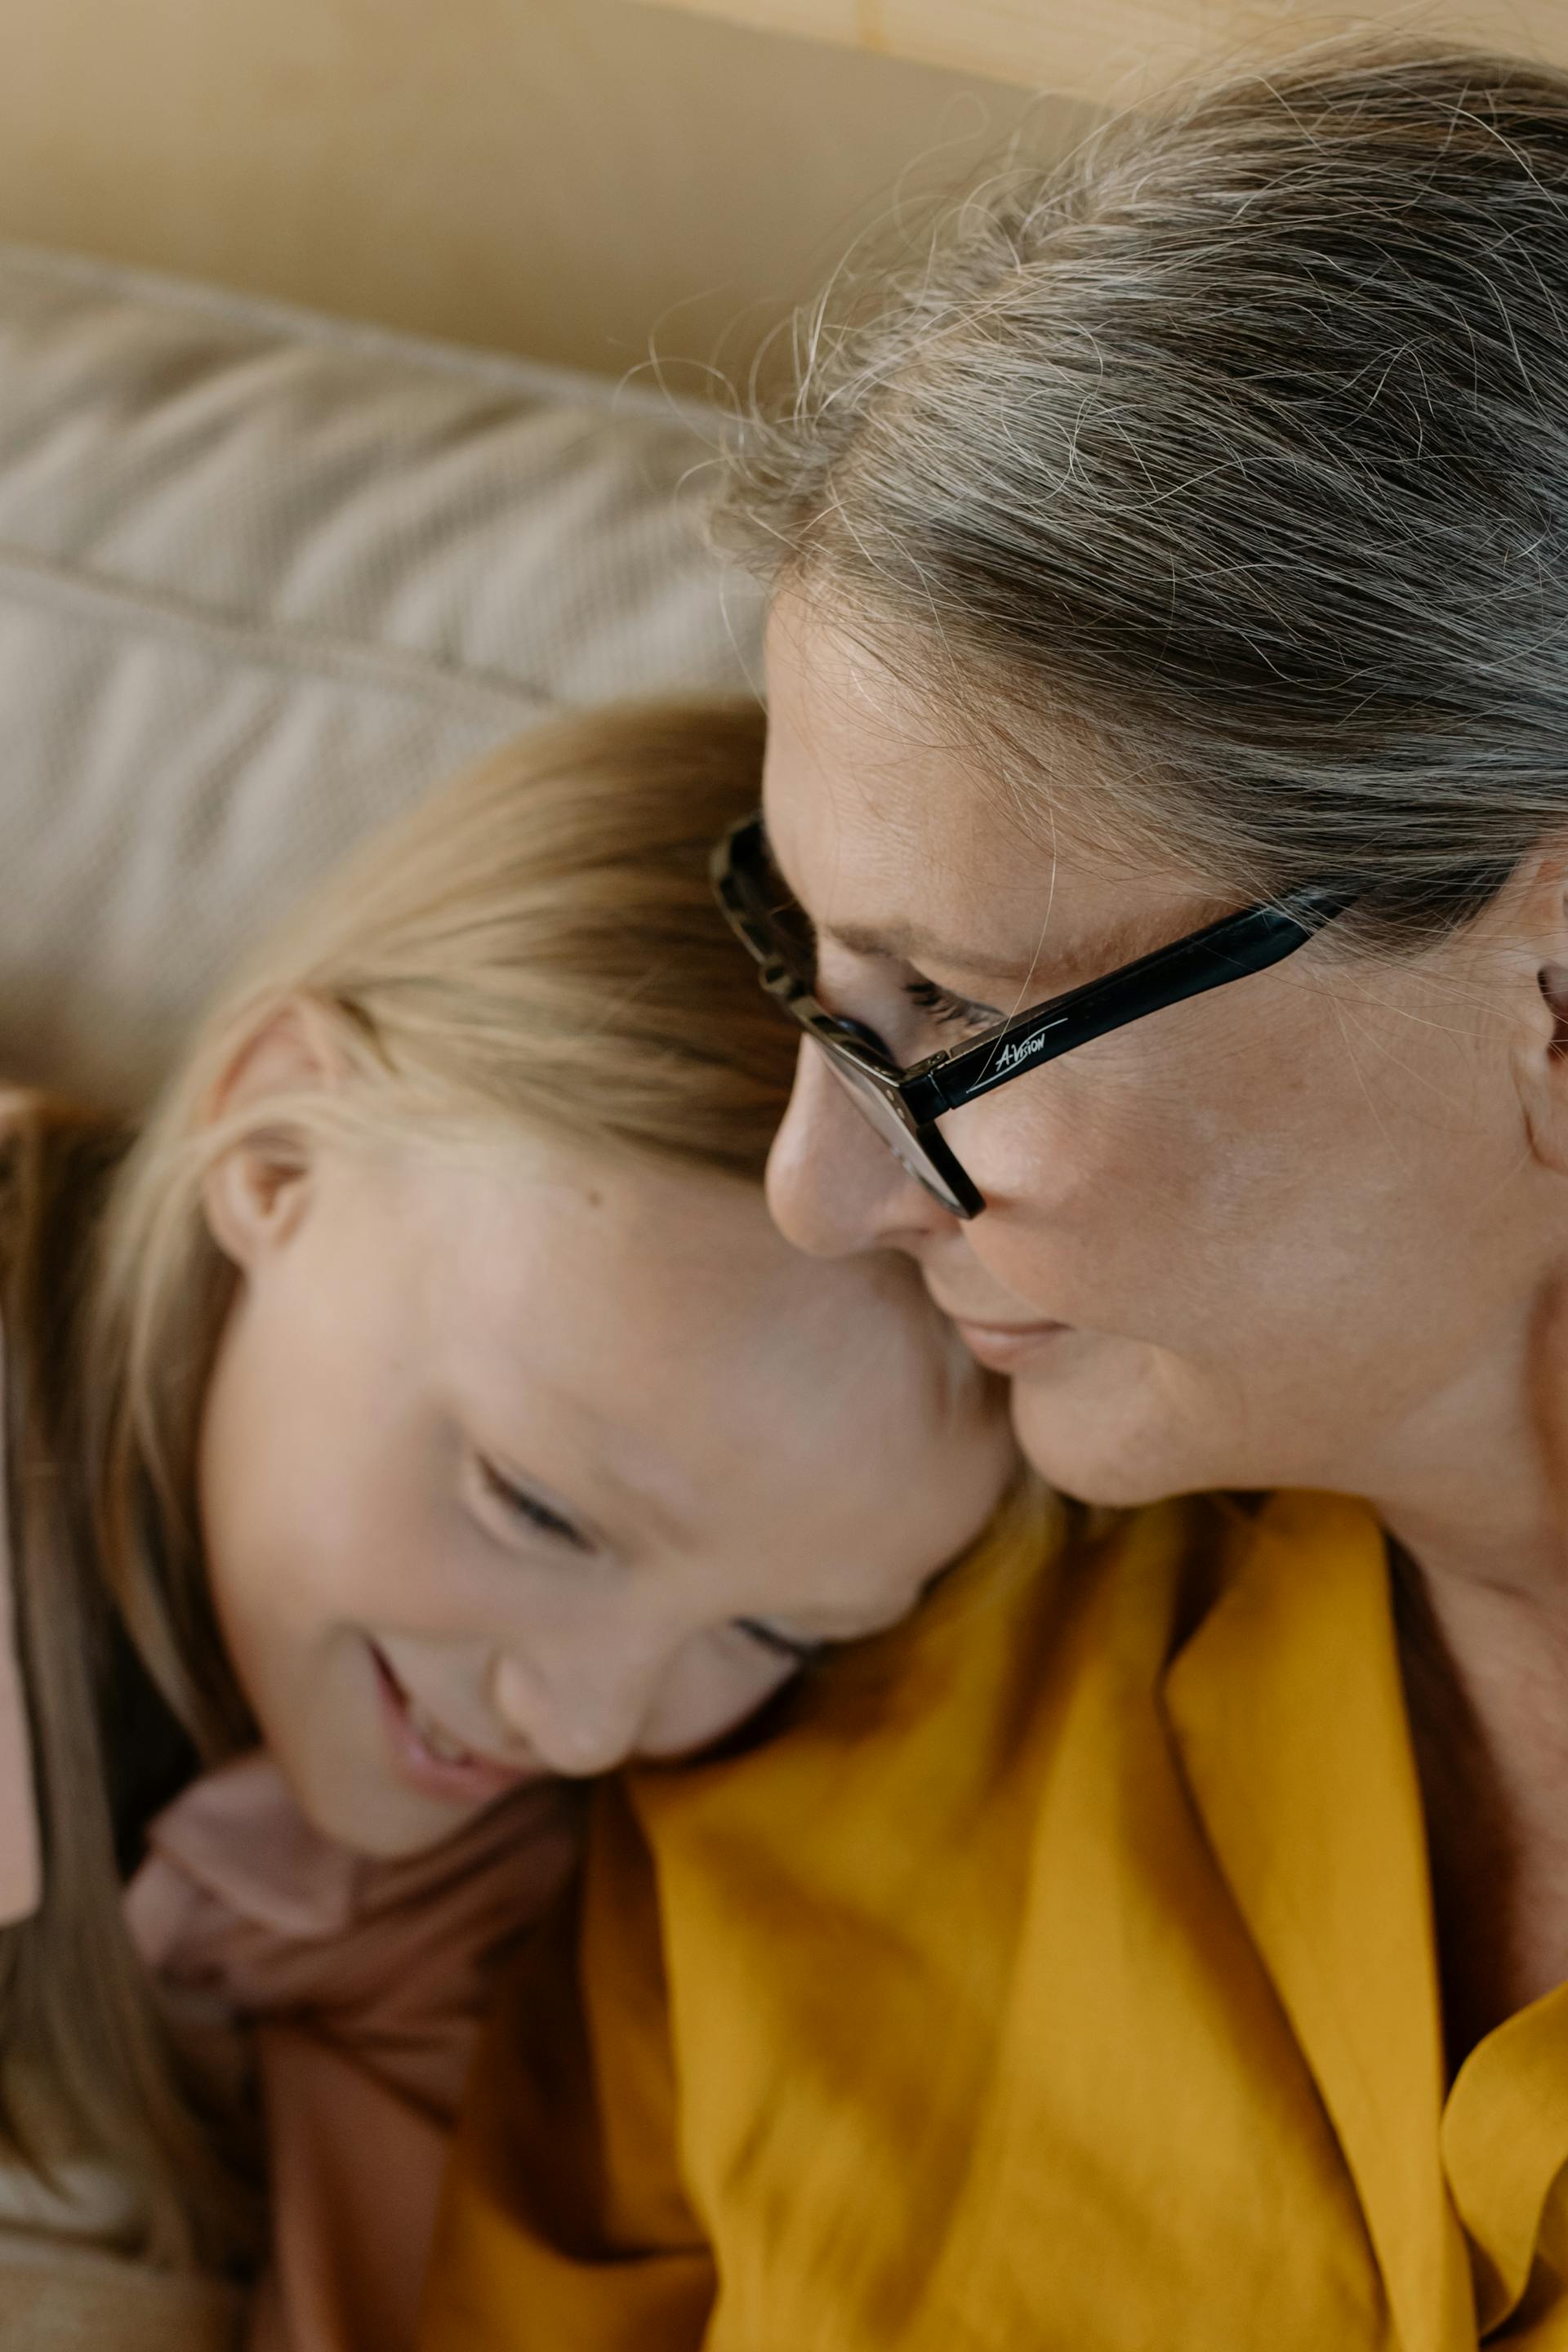 An elderly woman with her granddaughter | Source: Pexels